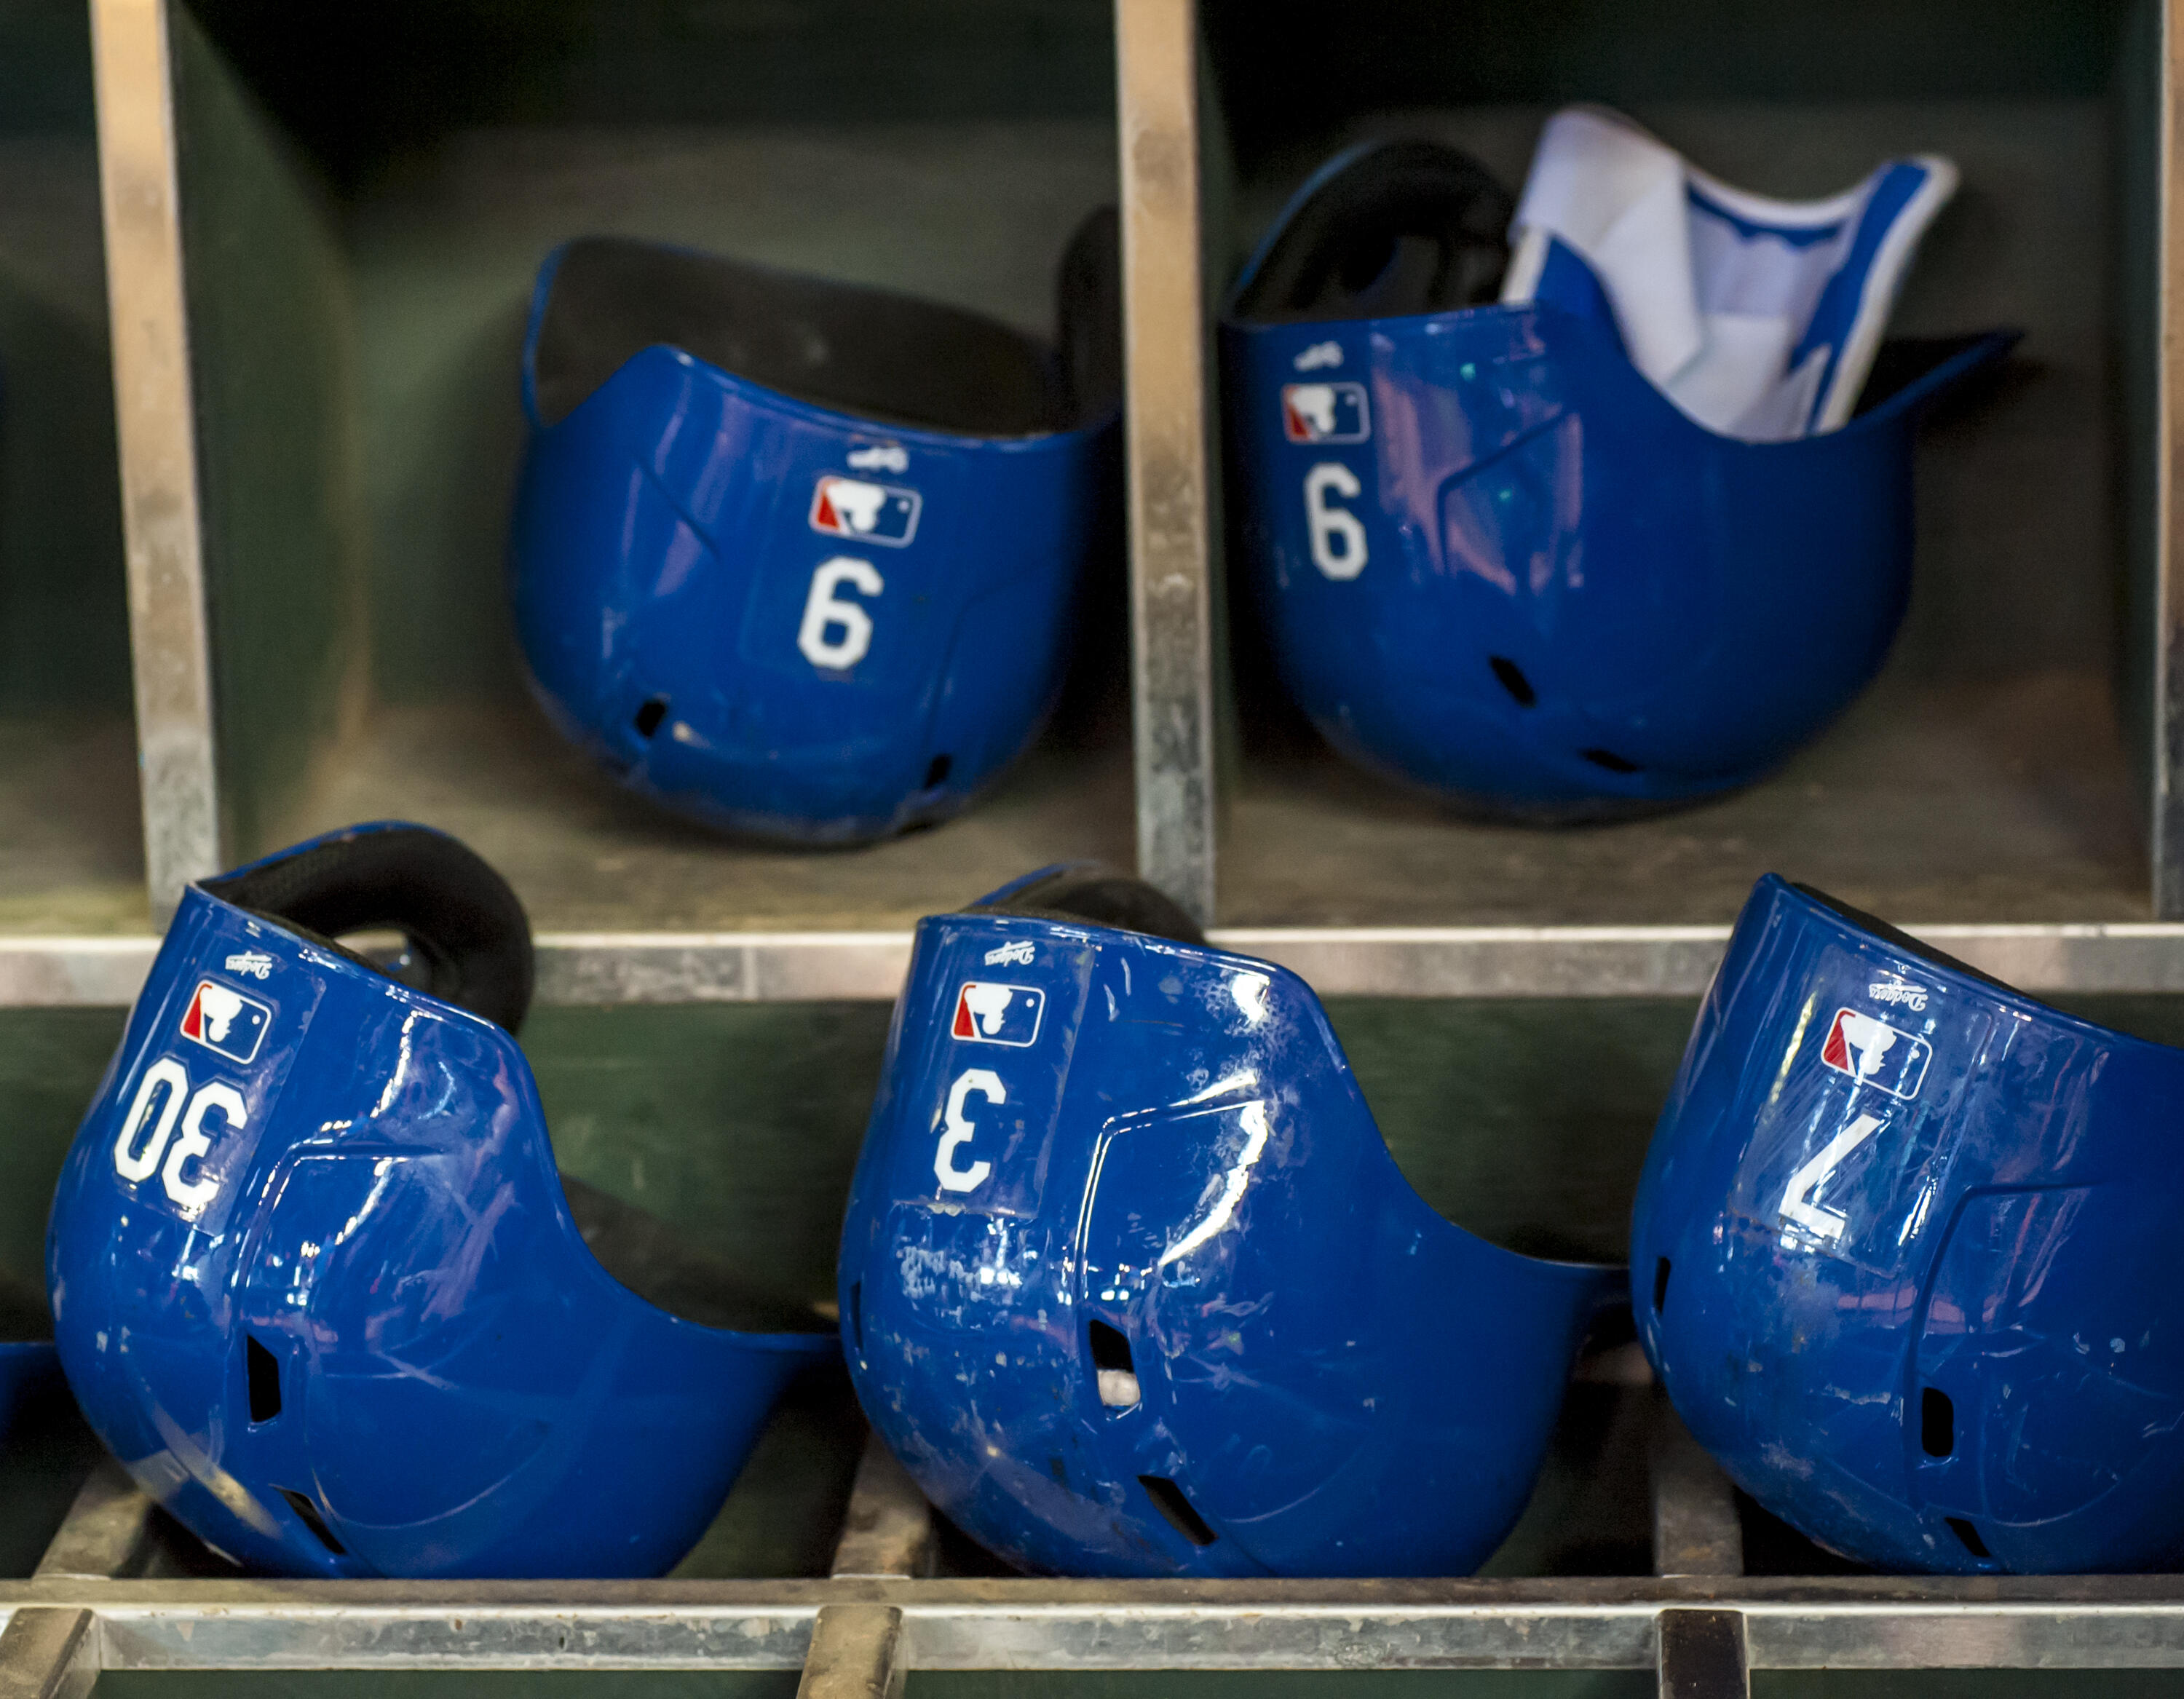 PHOENIX, AZ - SEPTEMBER 13: Helmet rack of the Los Angeles Dodgers before a MLB game against the Arizona Diamondbacks on September 13, 2015 at Chase Field in Phoenix, Arizona. (Photo by Darin Wallentine/Getty Images)